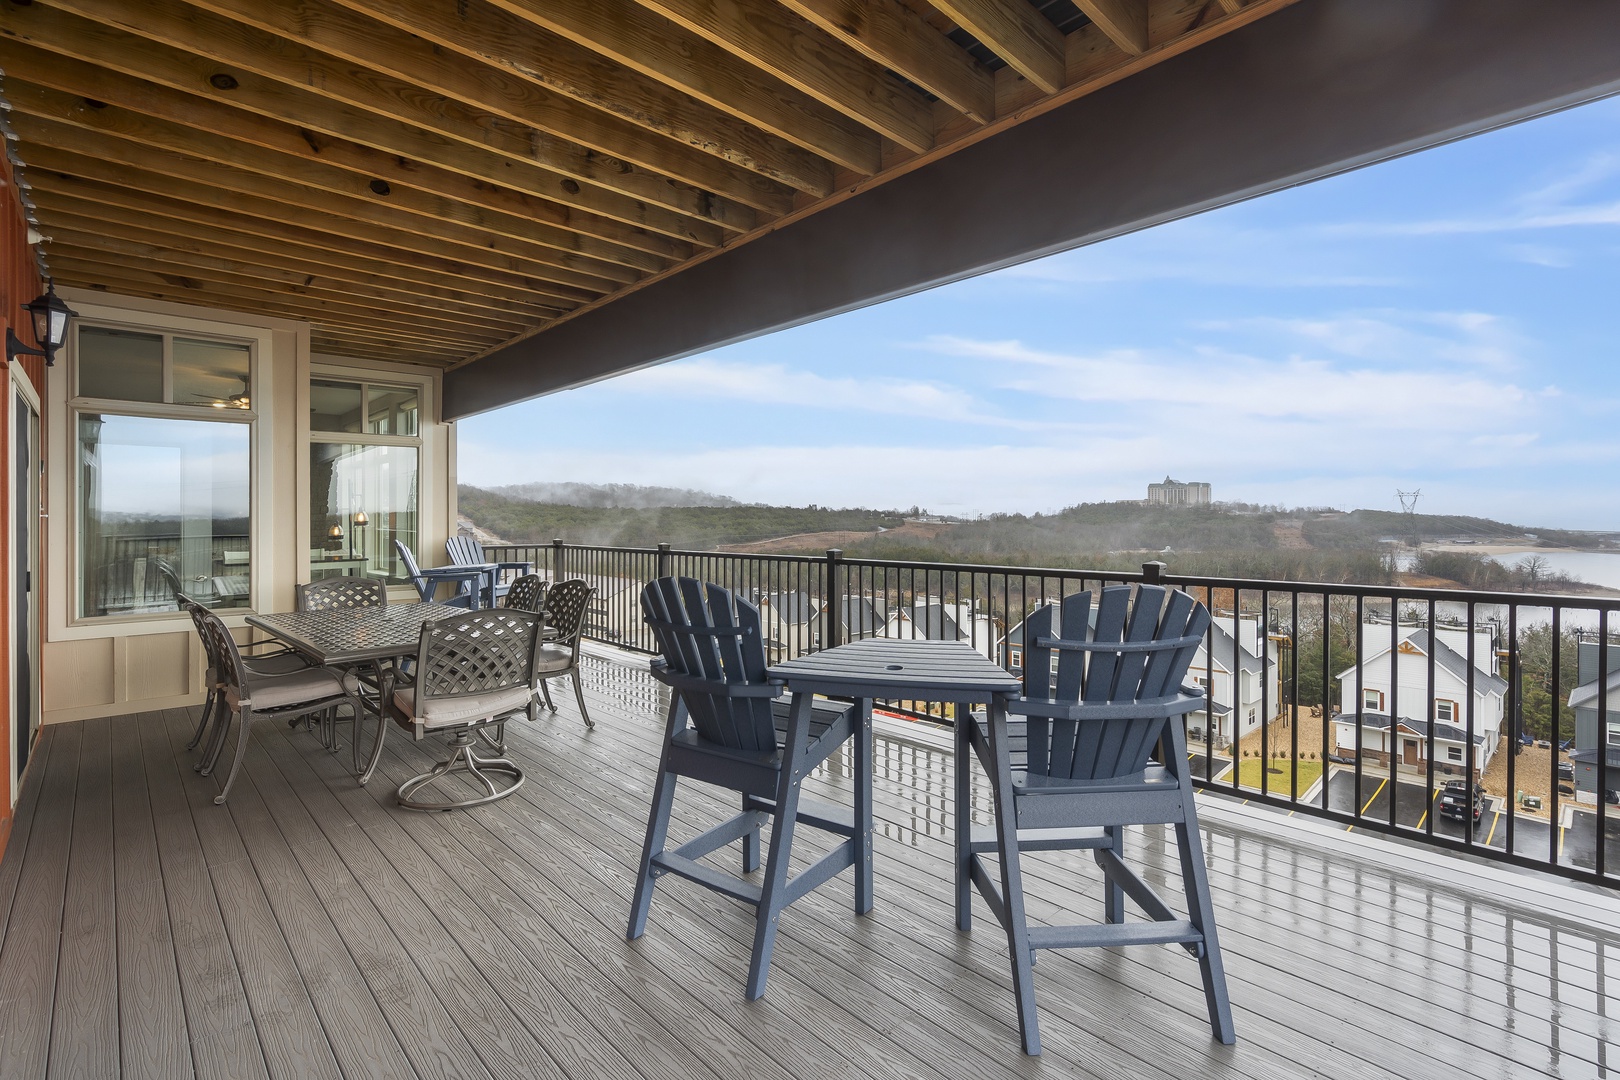 Dine & lounge on the expansive deck with breathtaking views